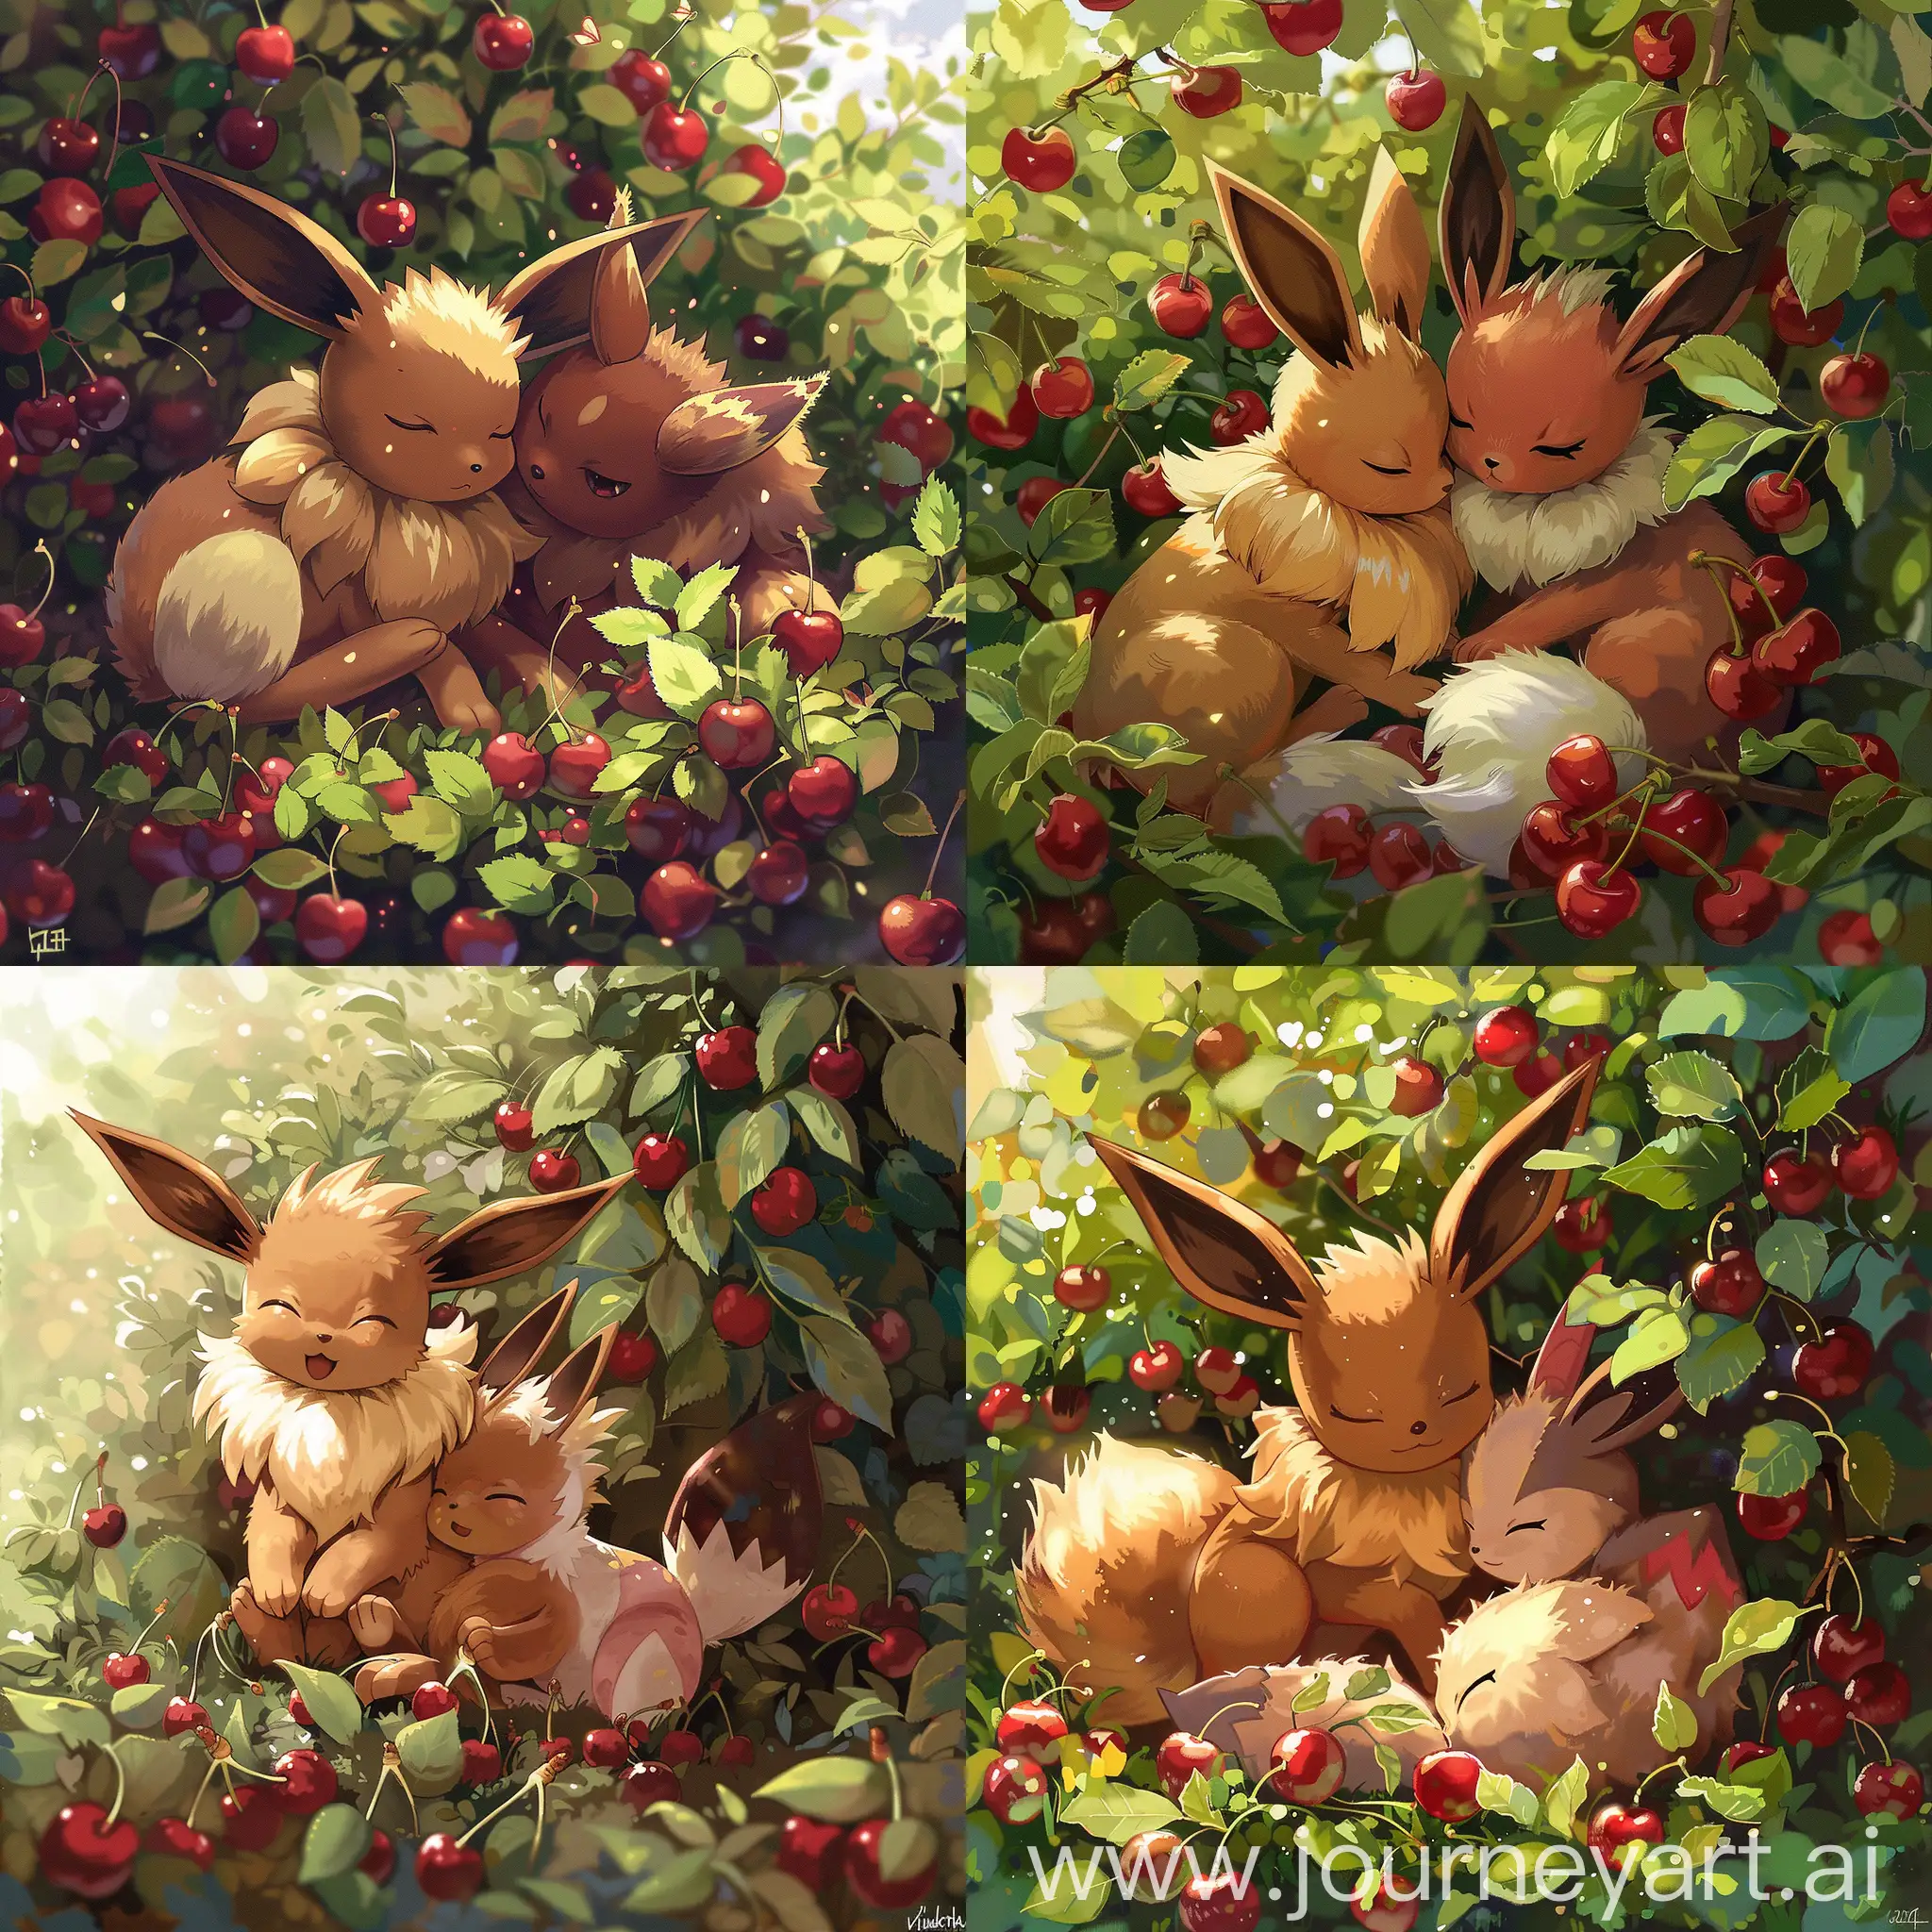 eevee from pokemon sitting in a bush next to a vulpix and they are cuddling. the bush is full of cherries